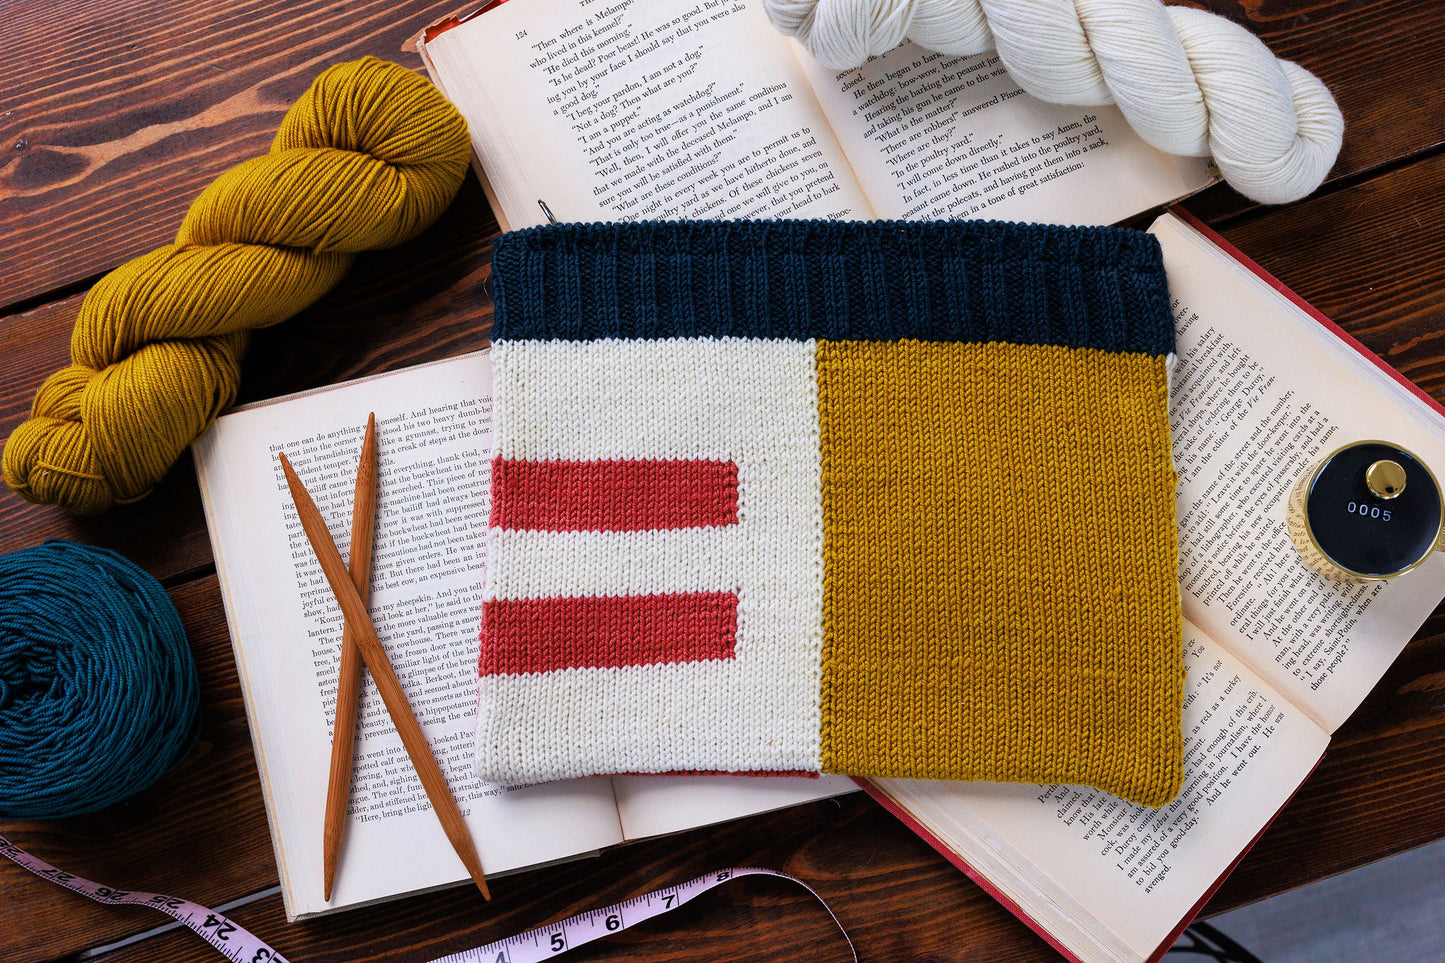 A pouch, the Case Study pouch, lies on a table surrounded by books, yarn, and knitting needles. The pouch features an intarsia colourblock design, made up of yellow, white, red, and blue sections.